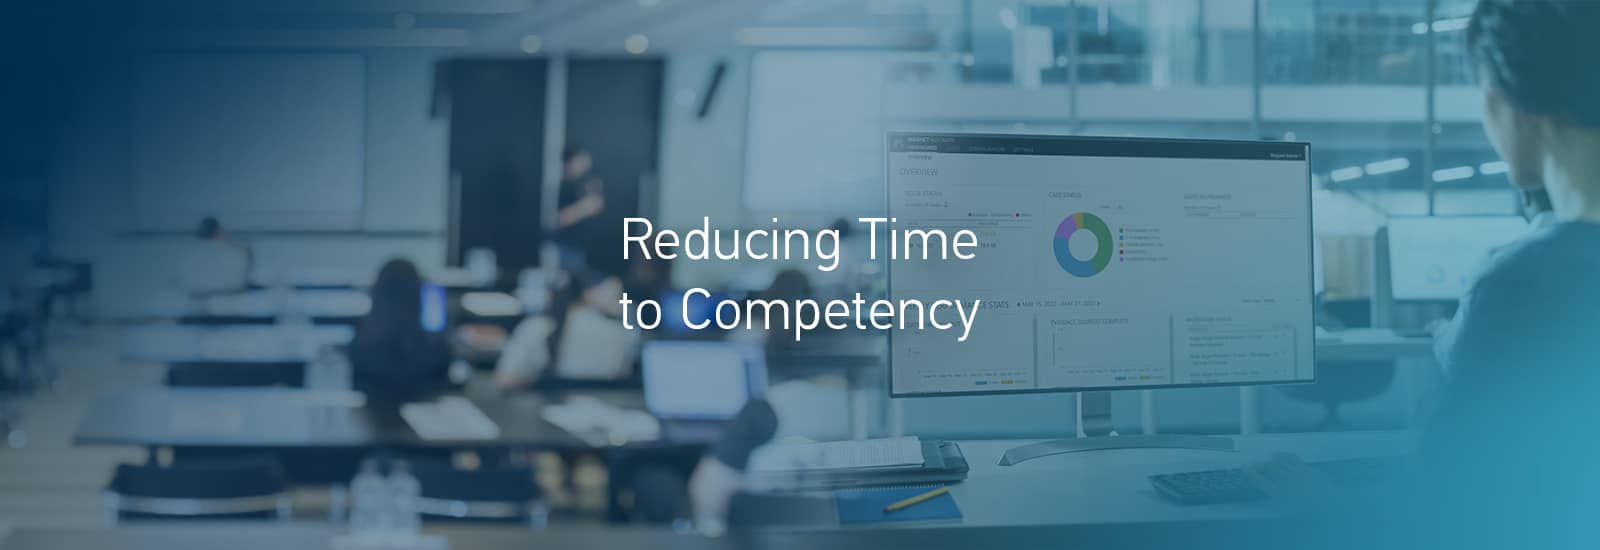 Reducing Time to Competency